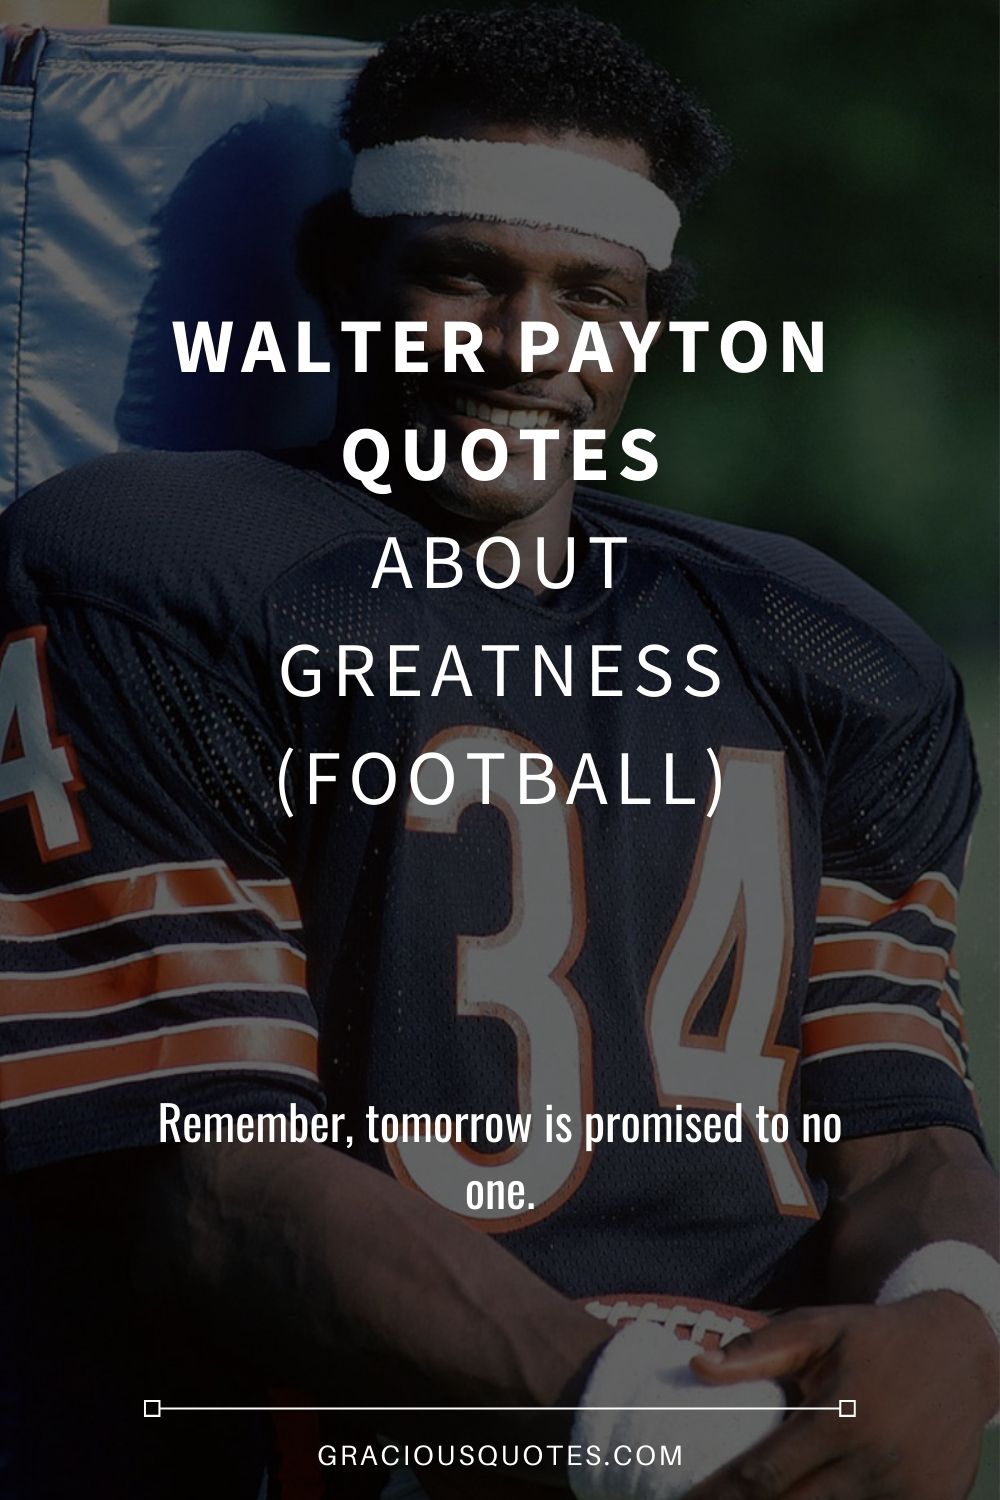 Walter Payton Quotes About Greatness (FOOTBALL) - Gracious Quotes